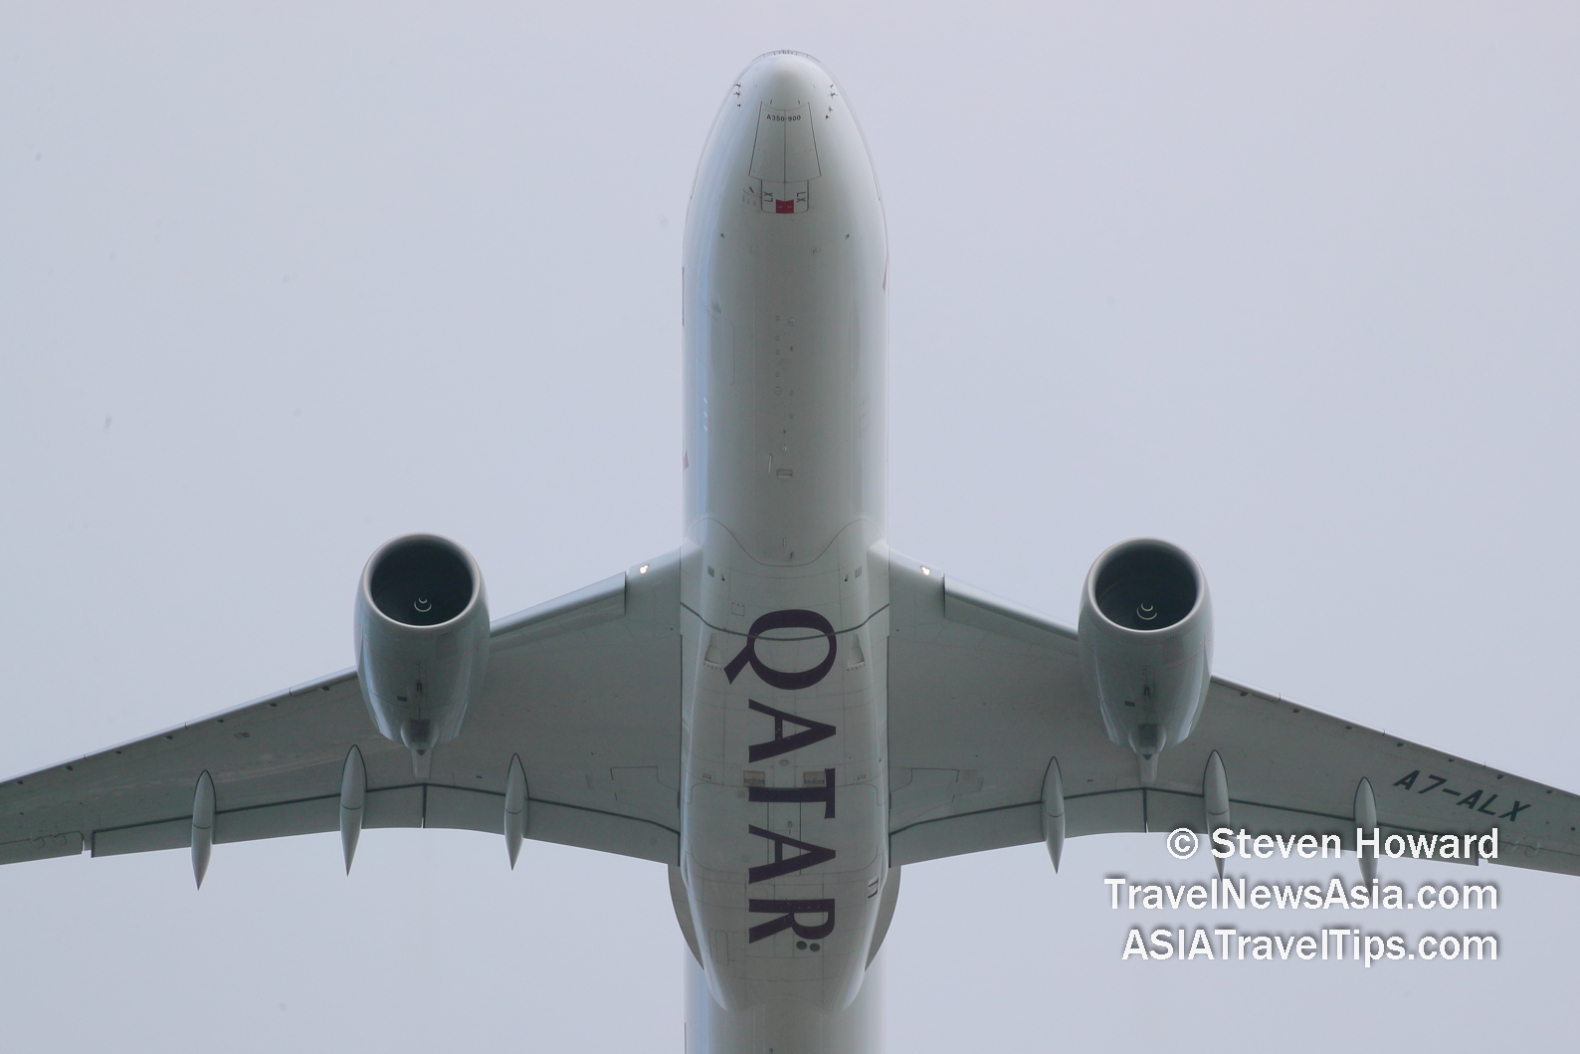 Qatar Airways Airbus A350. Picture by Steven Howard of TravelNewsAsia.com Click to enlarge.